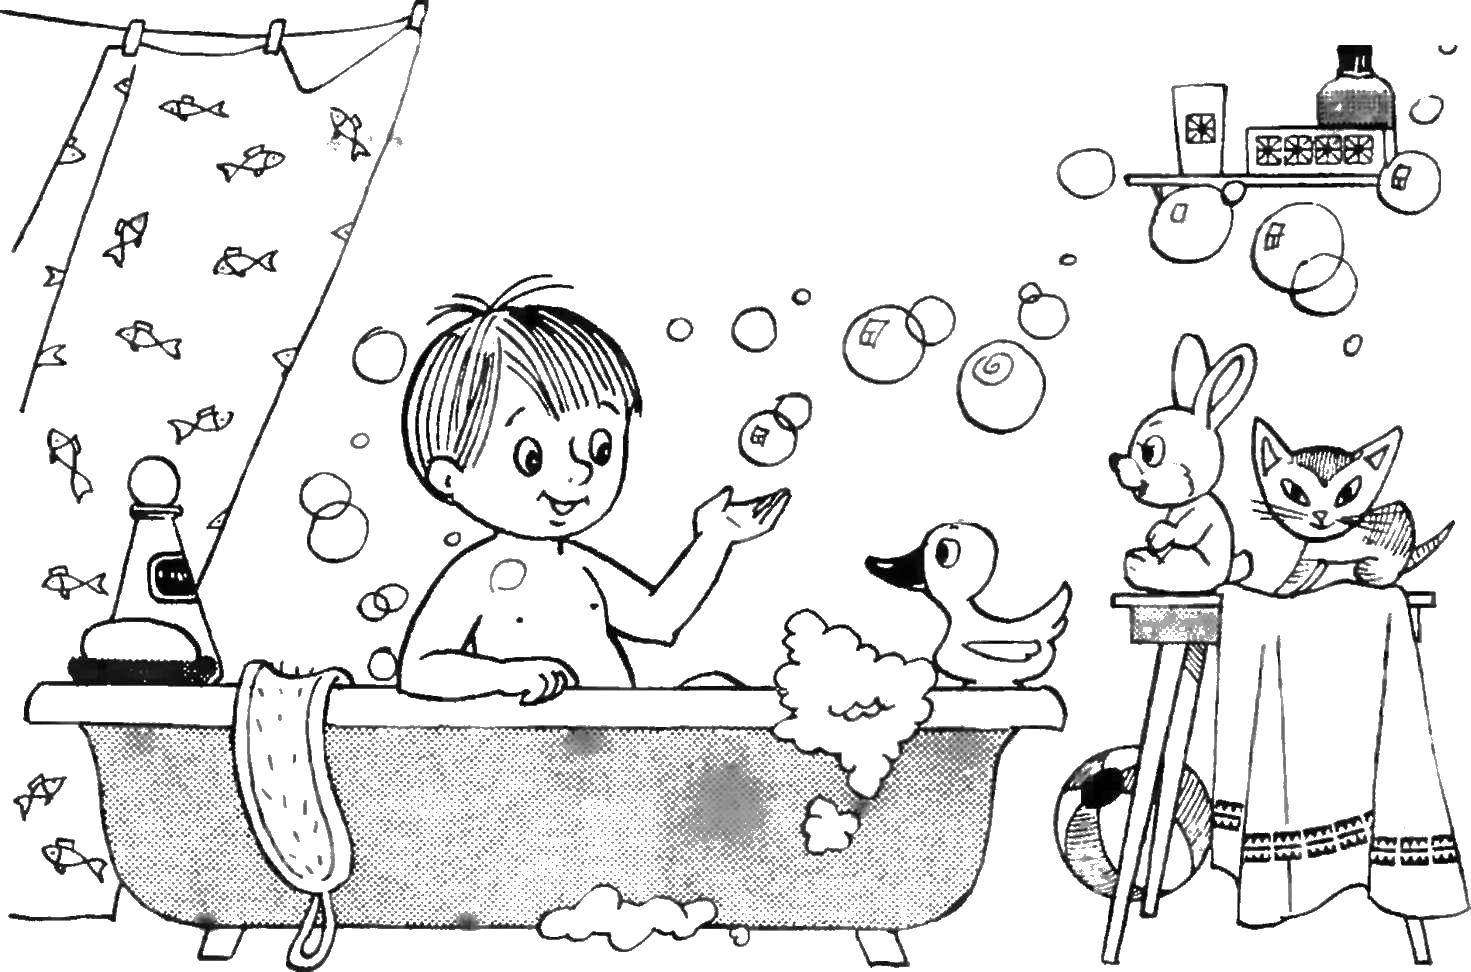 Coloring Bathing with animals. Category children. Tags:  Children, animals, games.